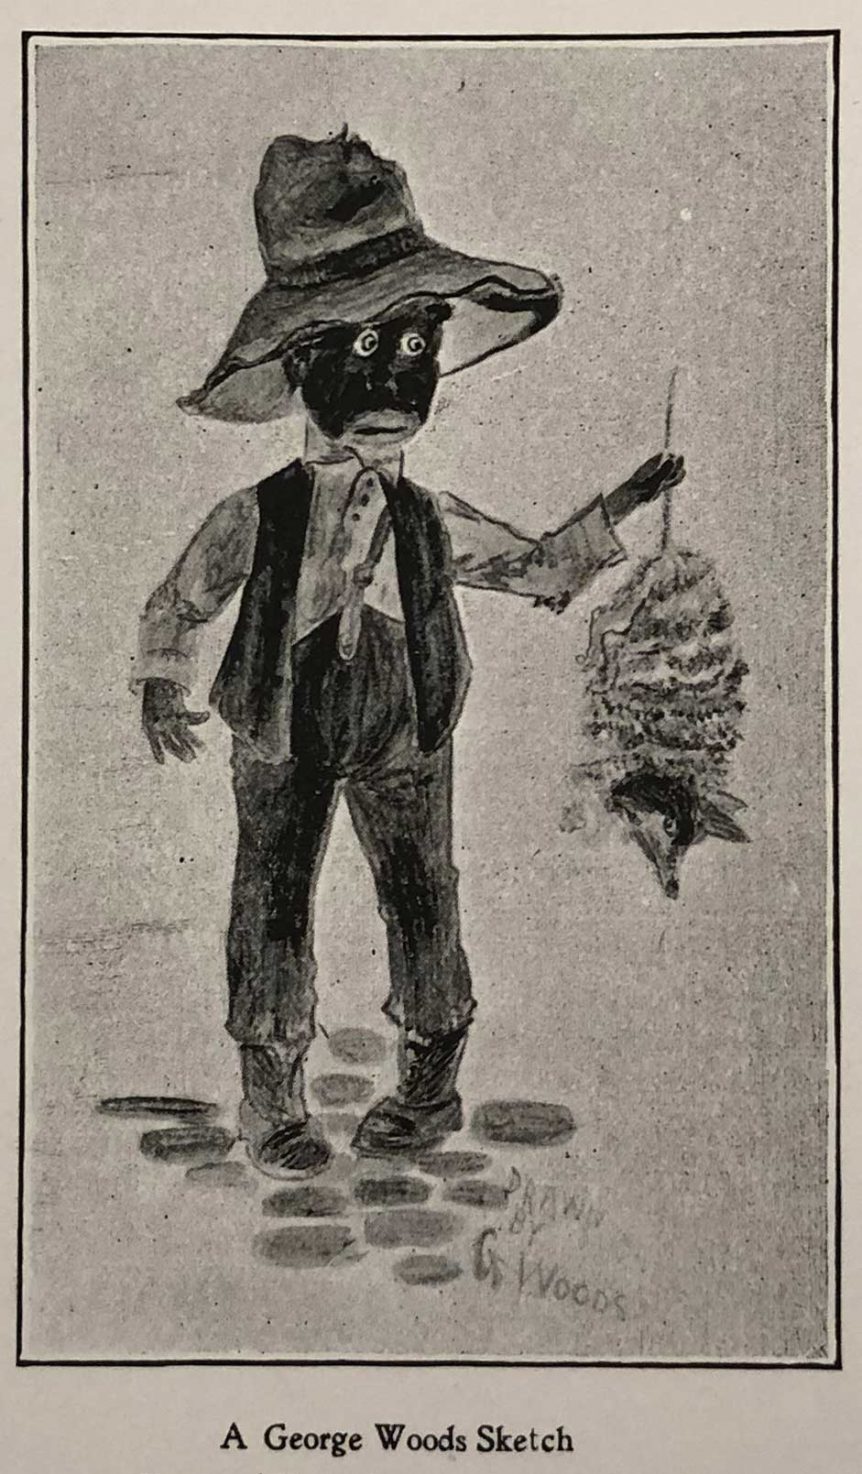 A sketch by George Woods showing a young black boy holding an opossum by the tail